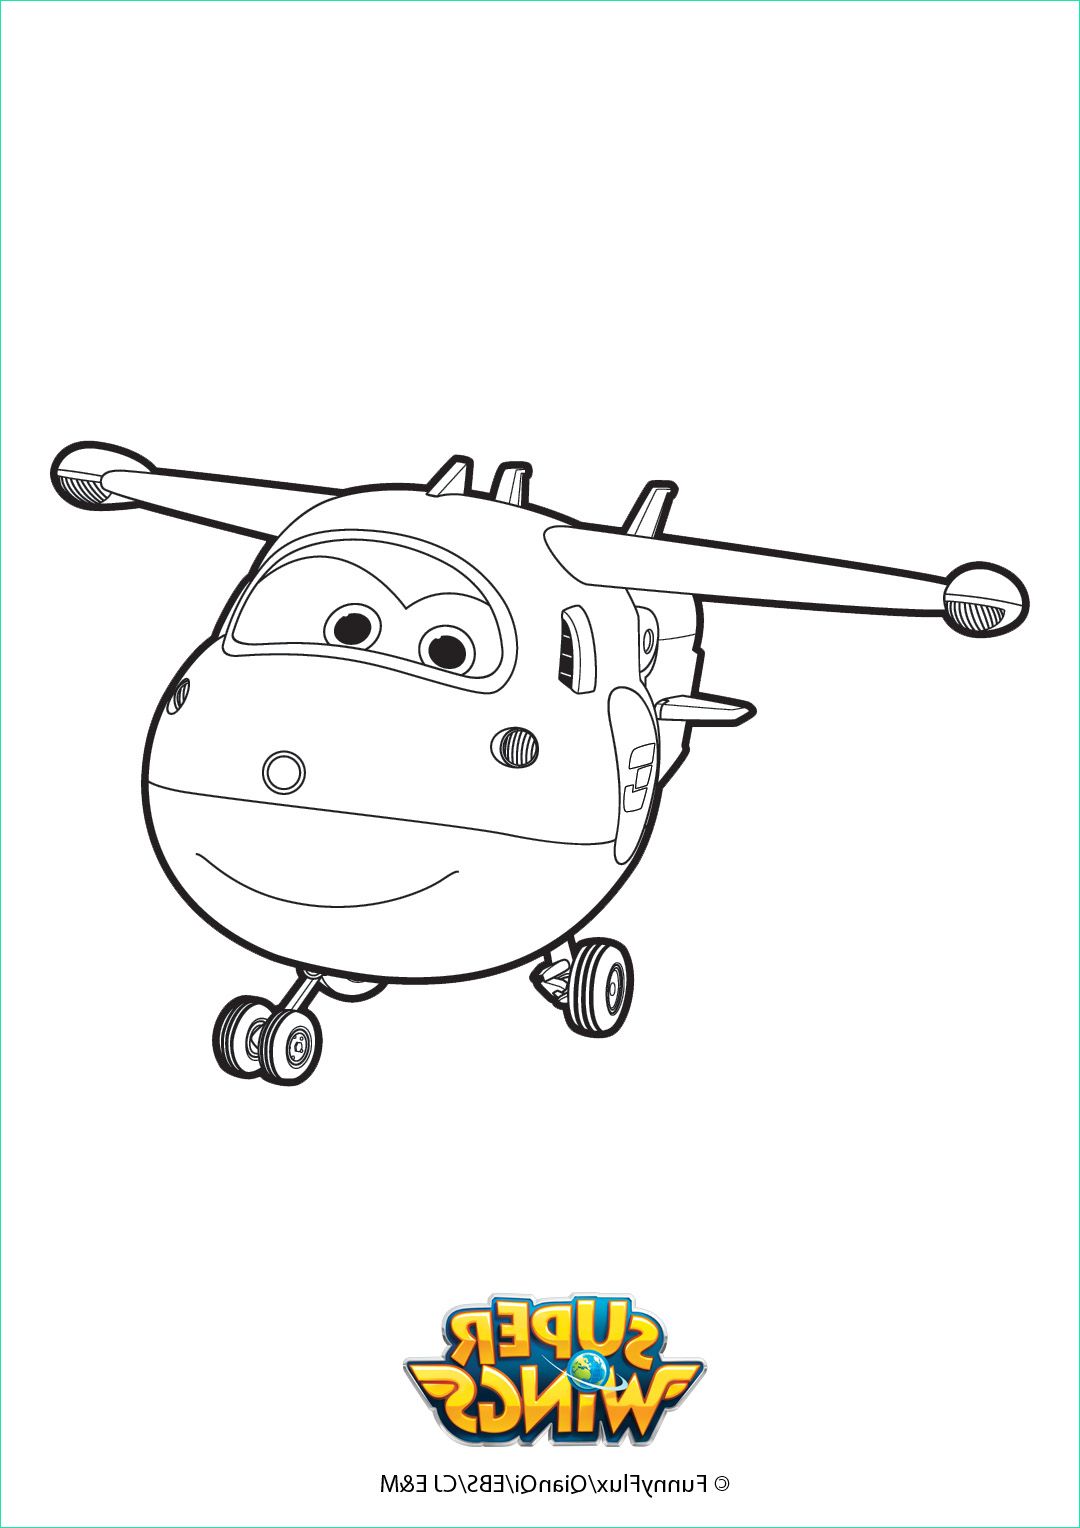 Super Wings Coloriage Inspirant Images Dessin Manga Dessin Anime Super Wings Personnage